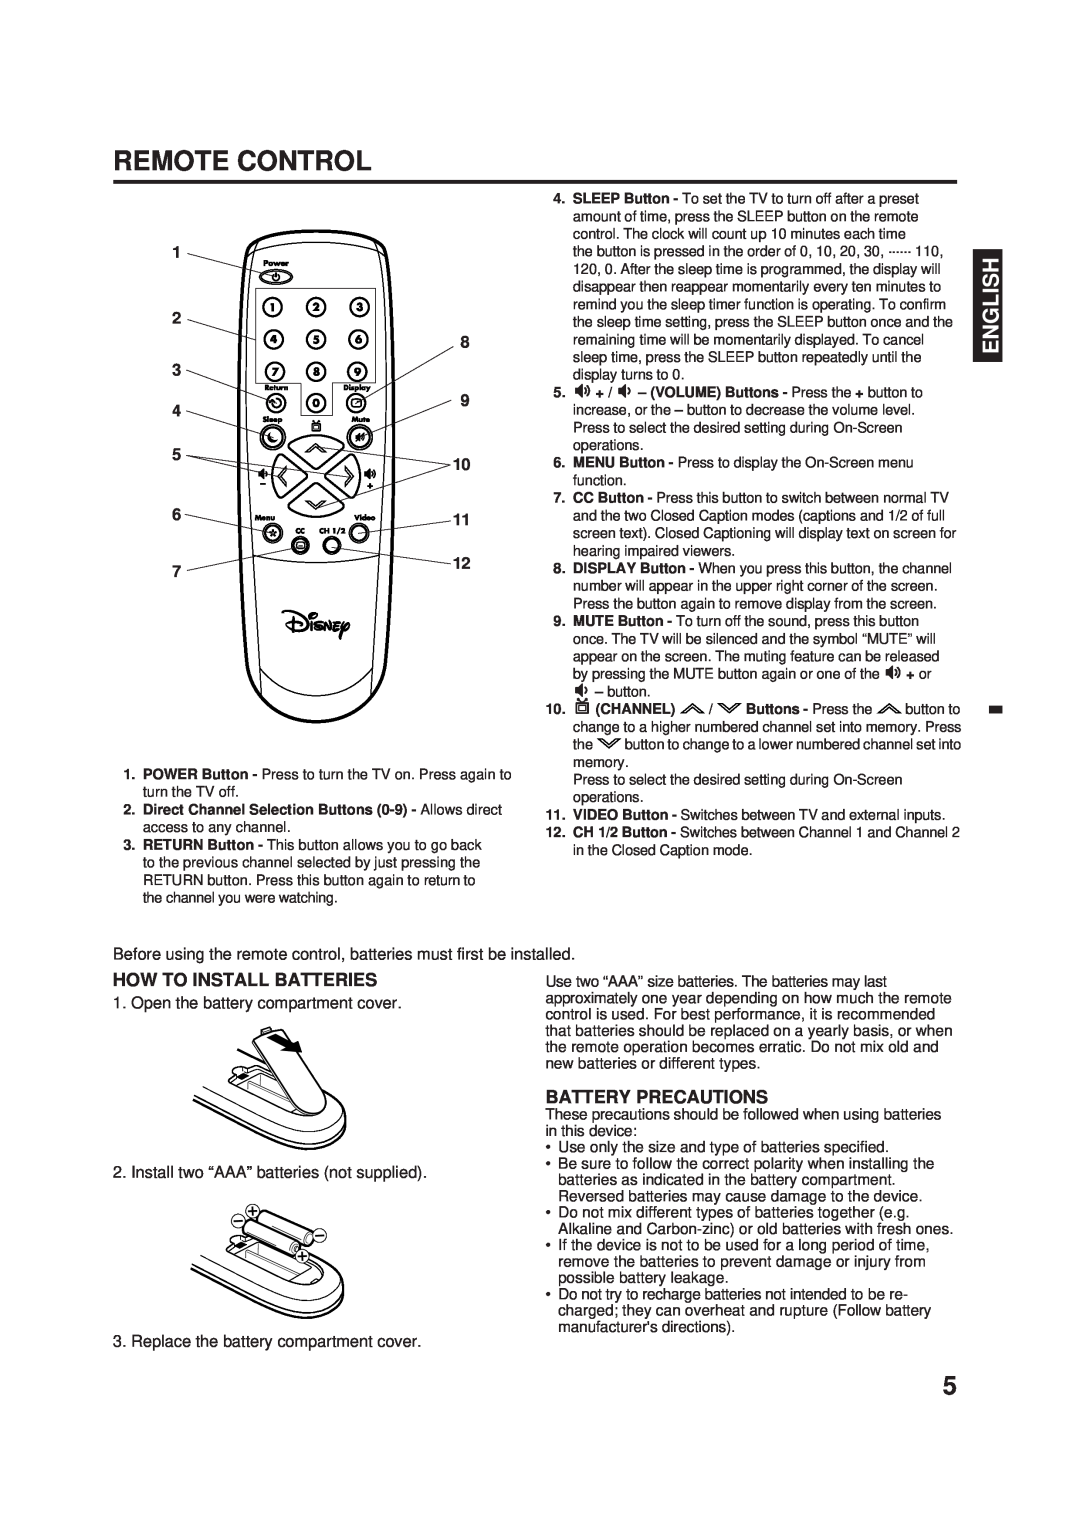 Memorex DT1900-C manual Remote Control, How To Install Batteries, Battery Precautions, Open the battery compartment cover 